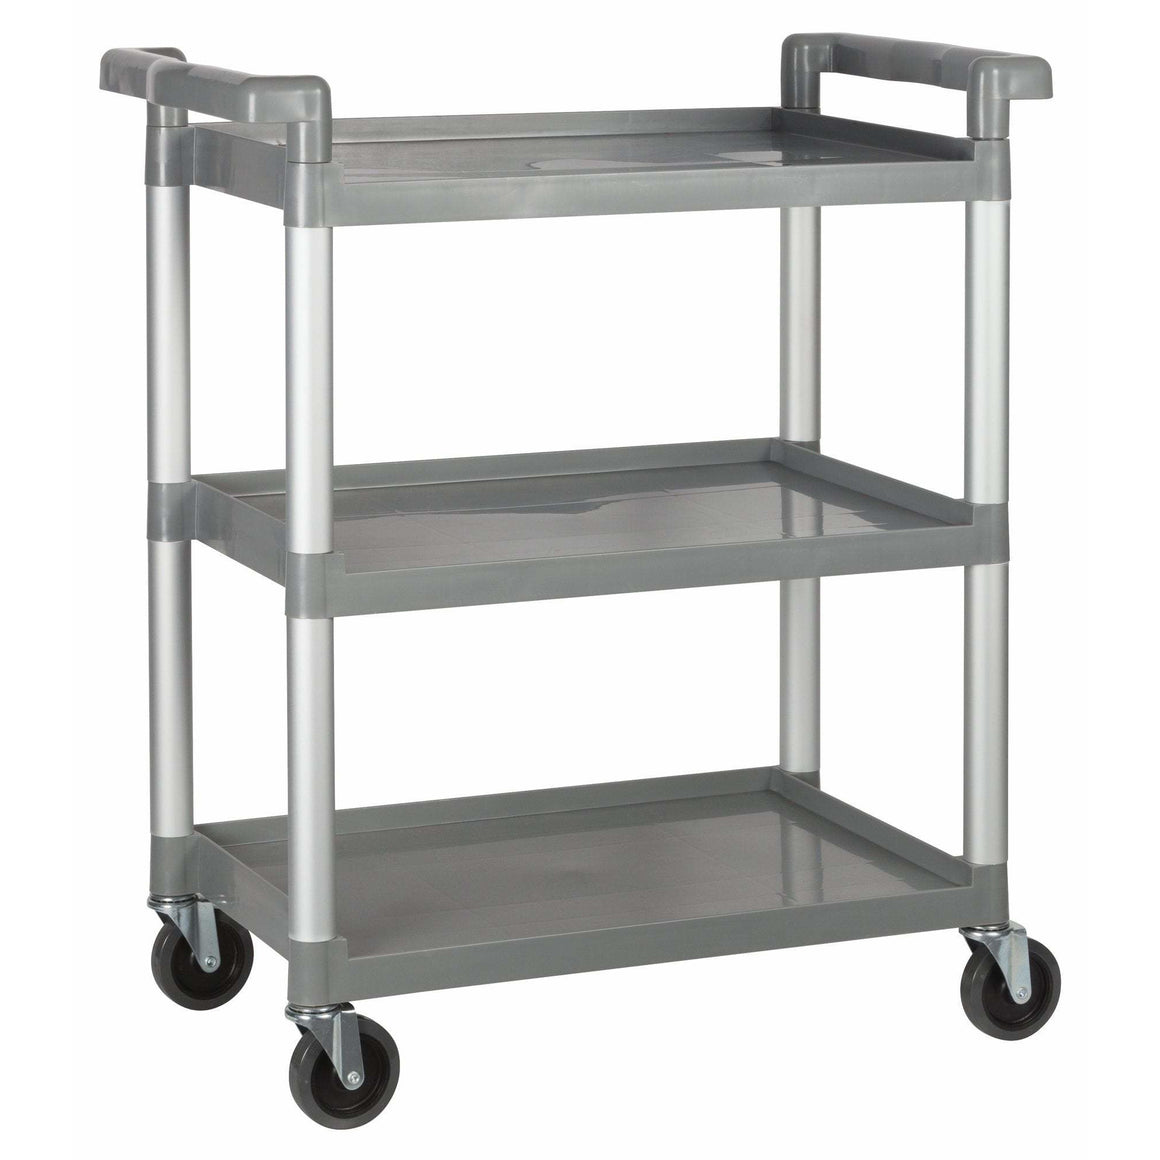 Winco - UC-2415G - Plastic Utility Cart, 32"L x 16-1/8"W x 36-3/4"H, 3 Tier, Gray - Bussing - Maltese & Co New and Used  restaurant Equipment 